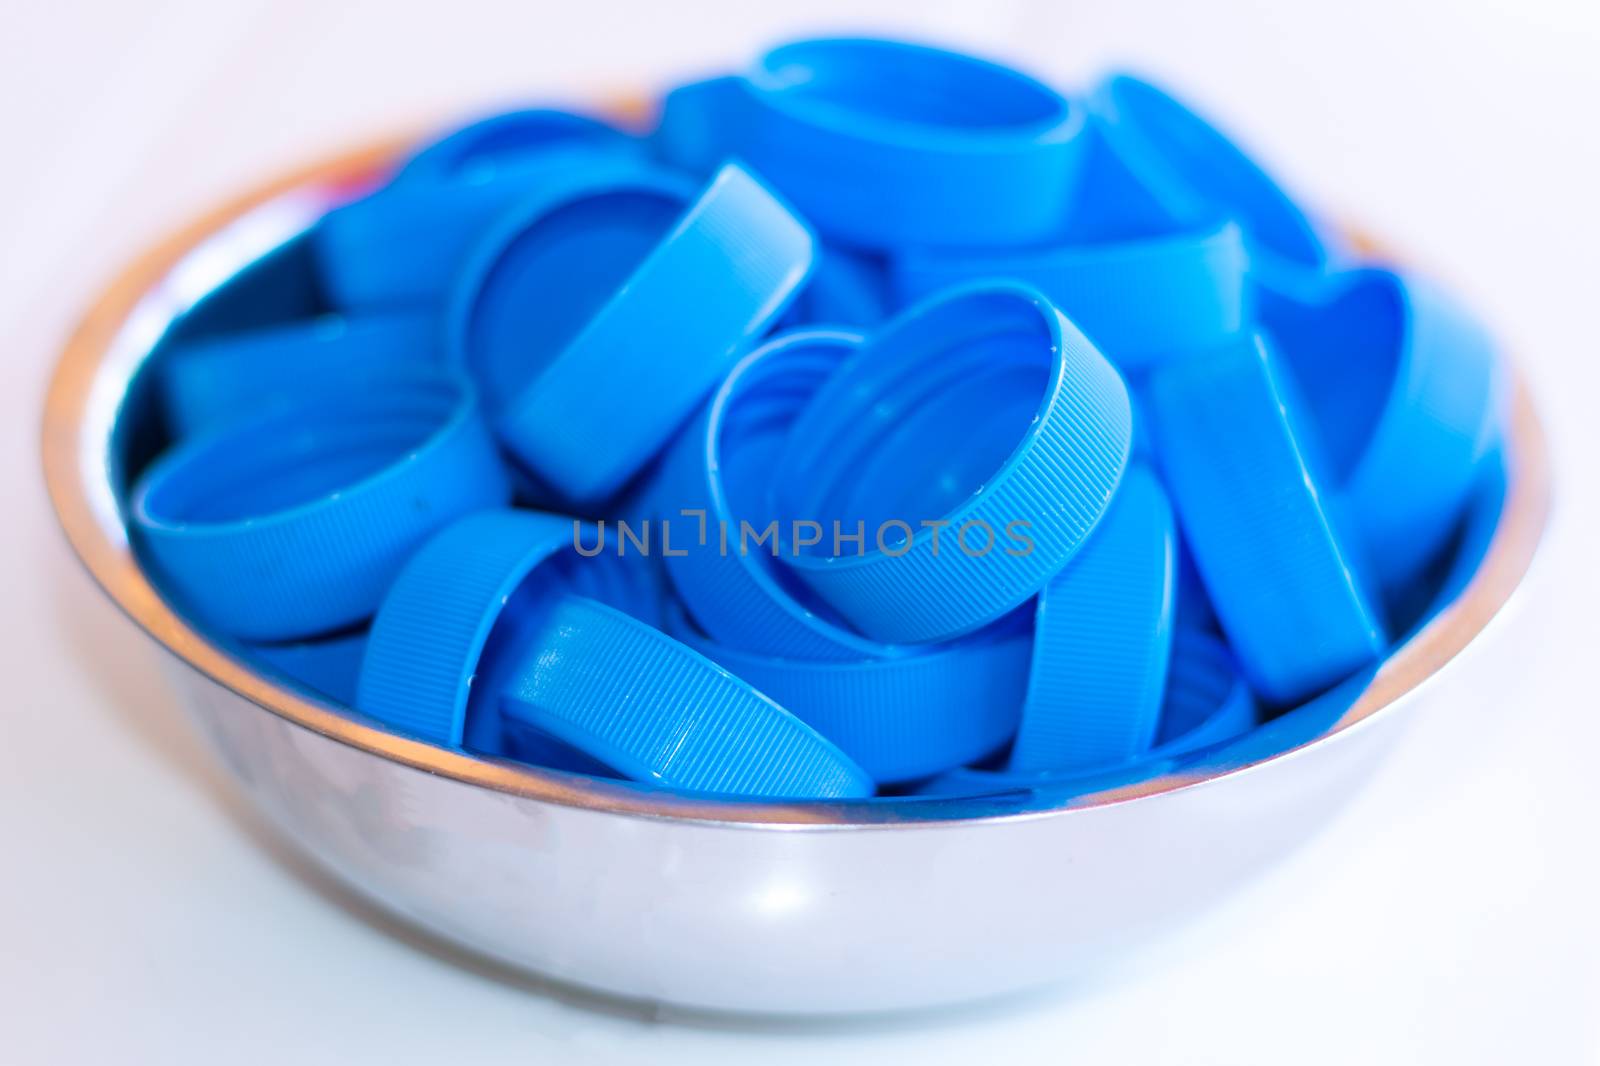 One stack of bottle caps, isolated on white background.